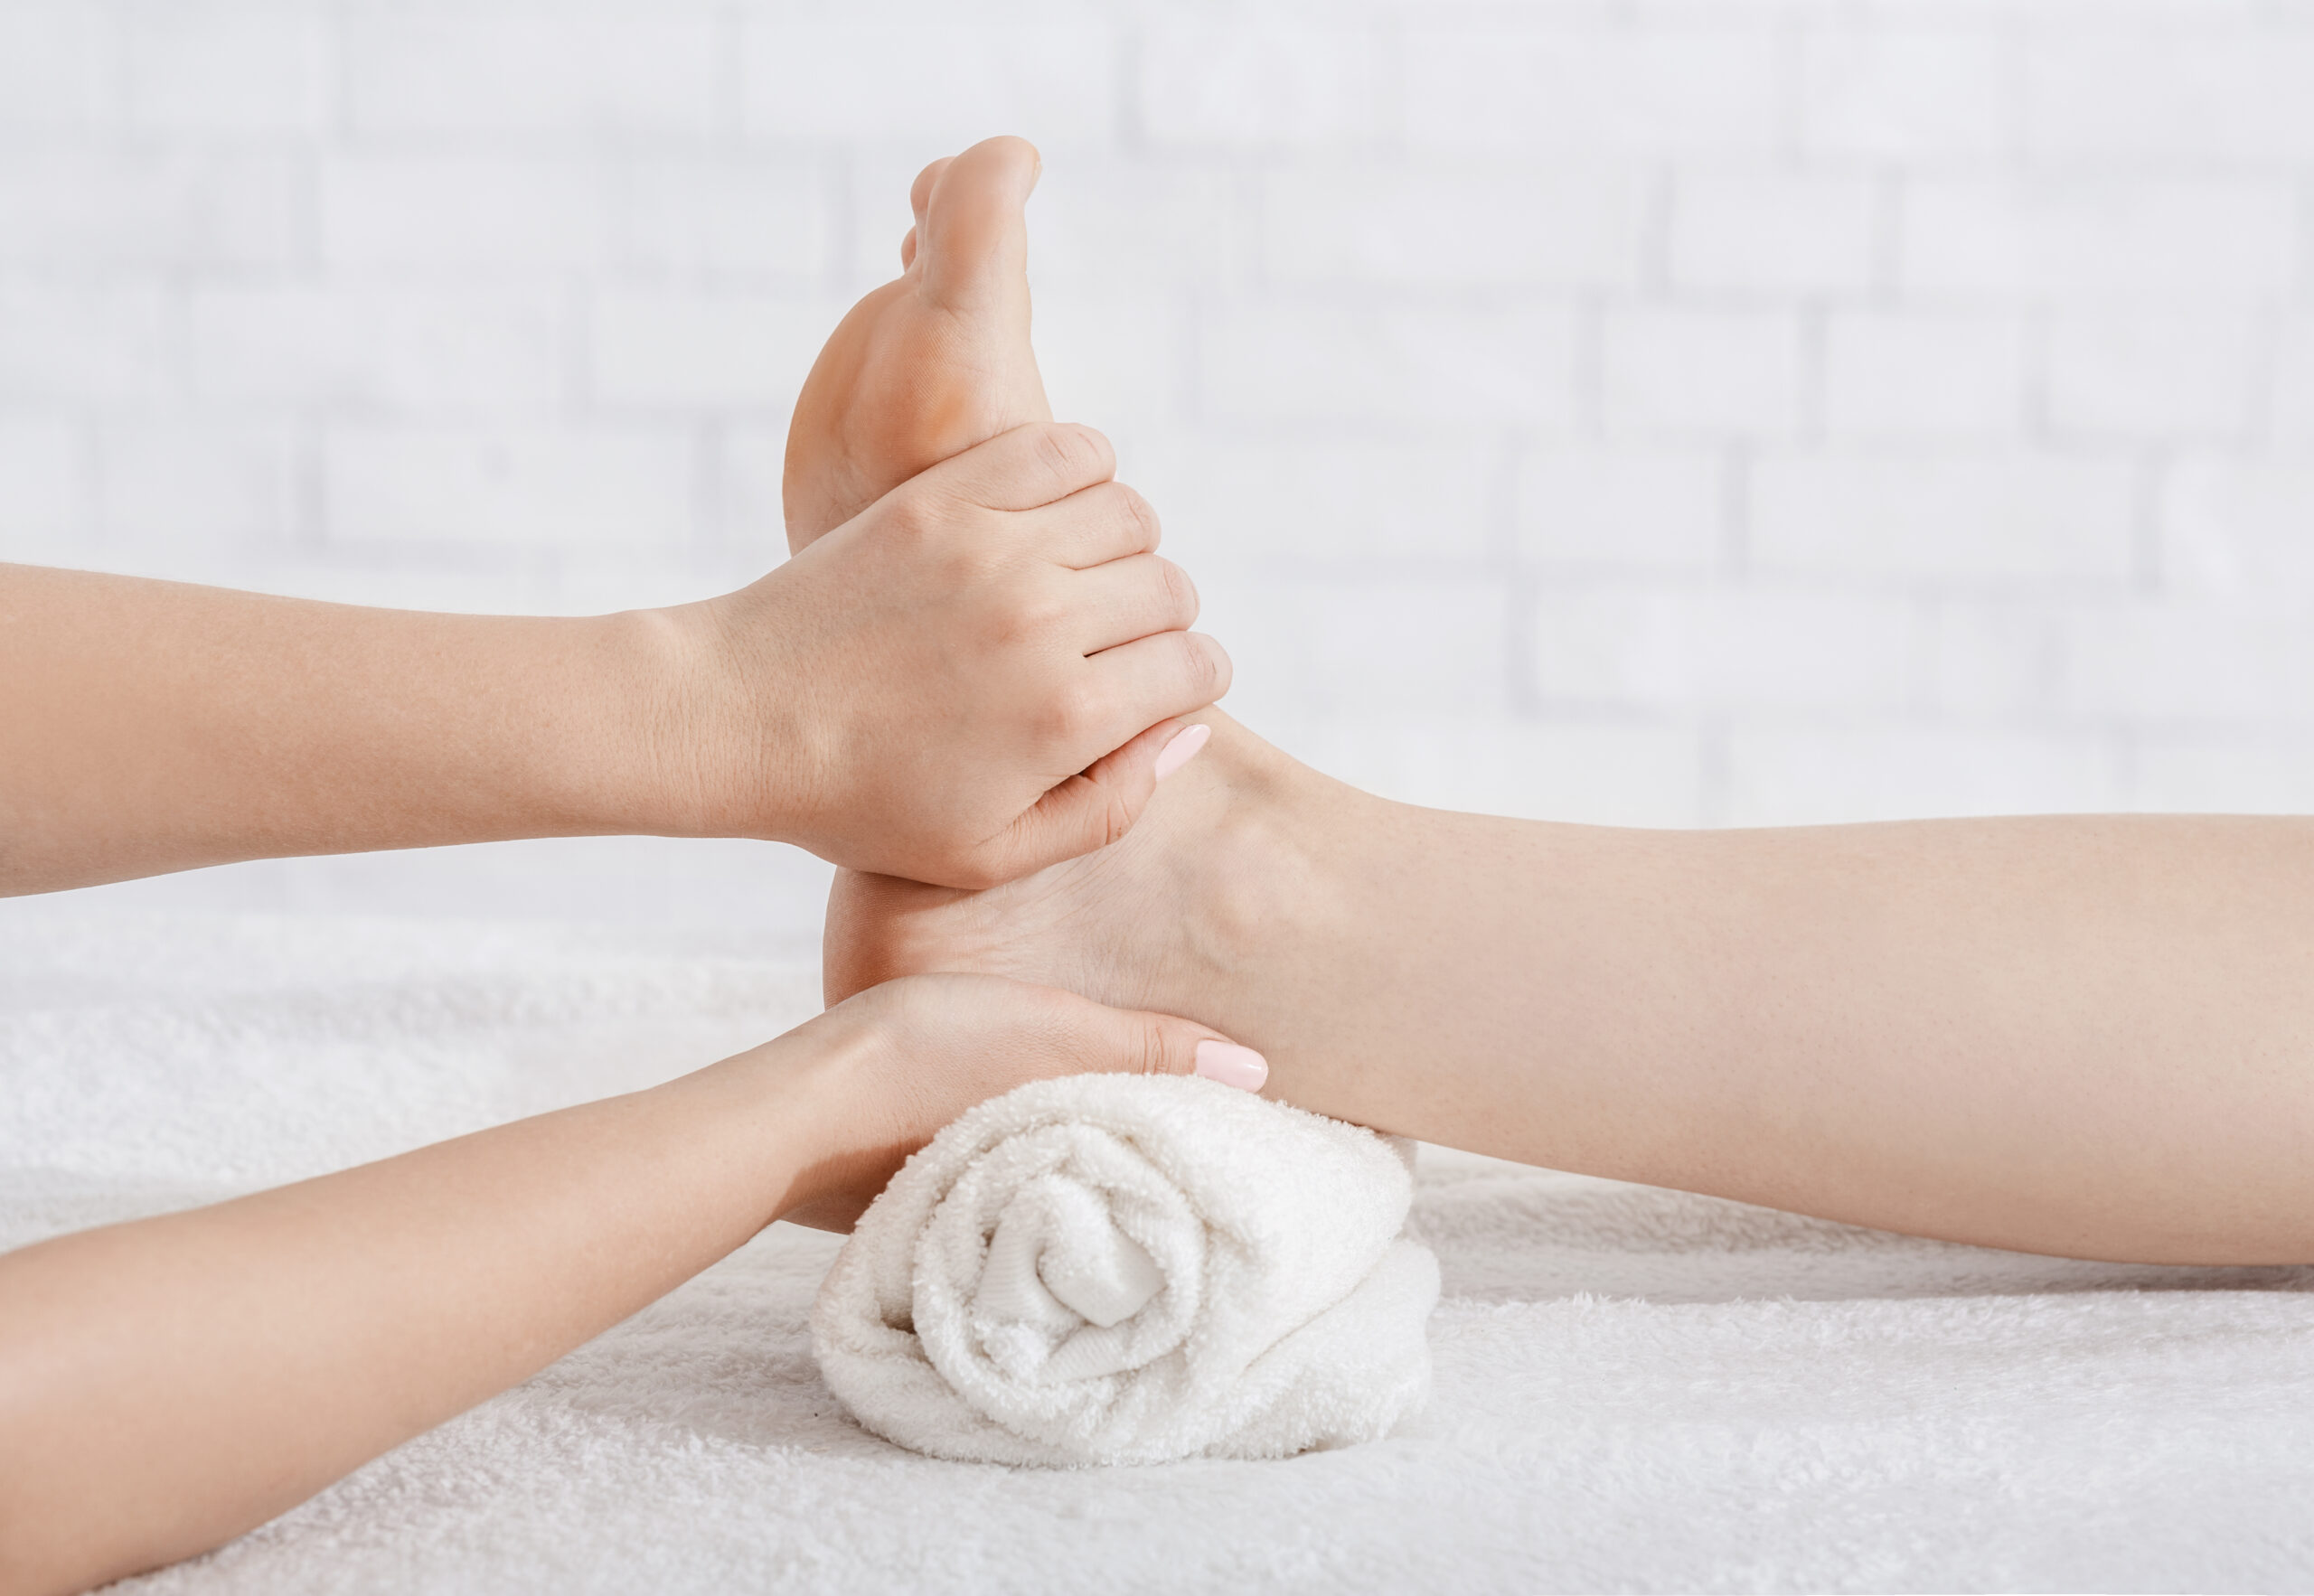 Where to Find the Best Reflexology Services?